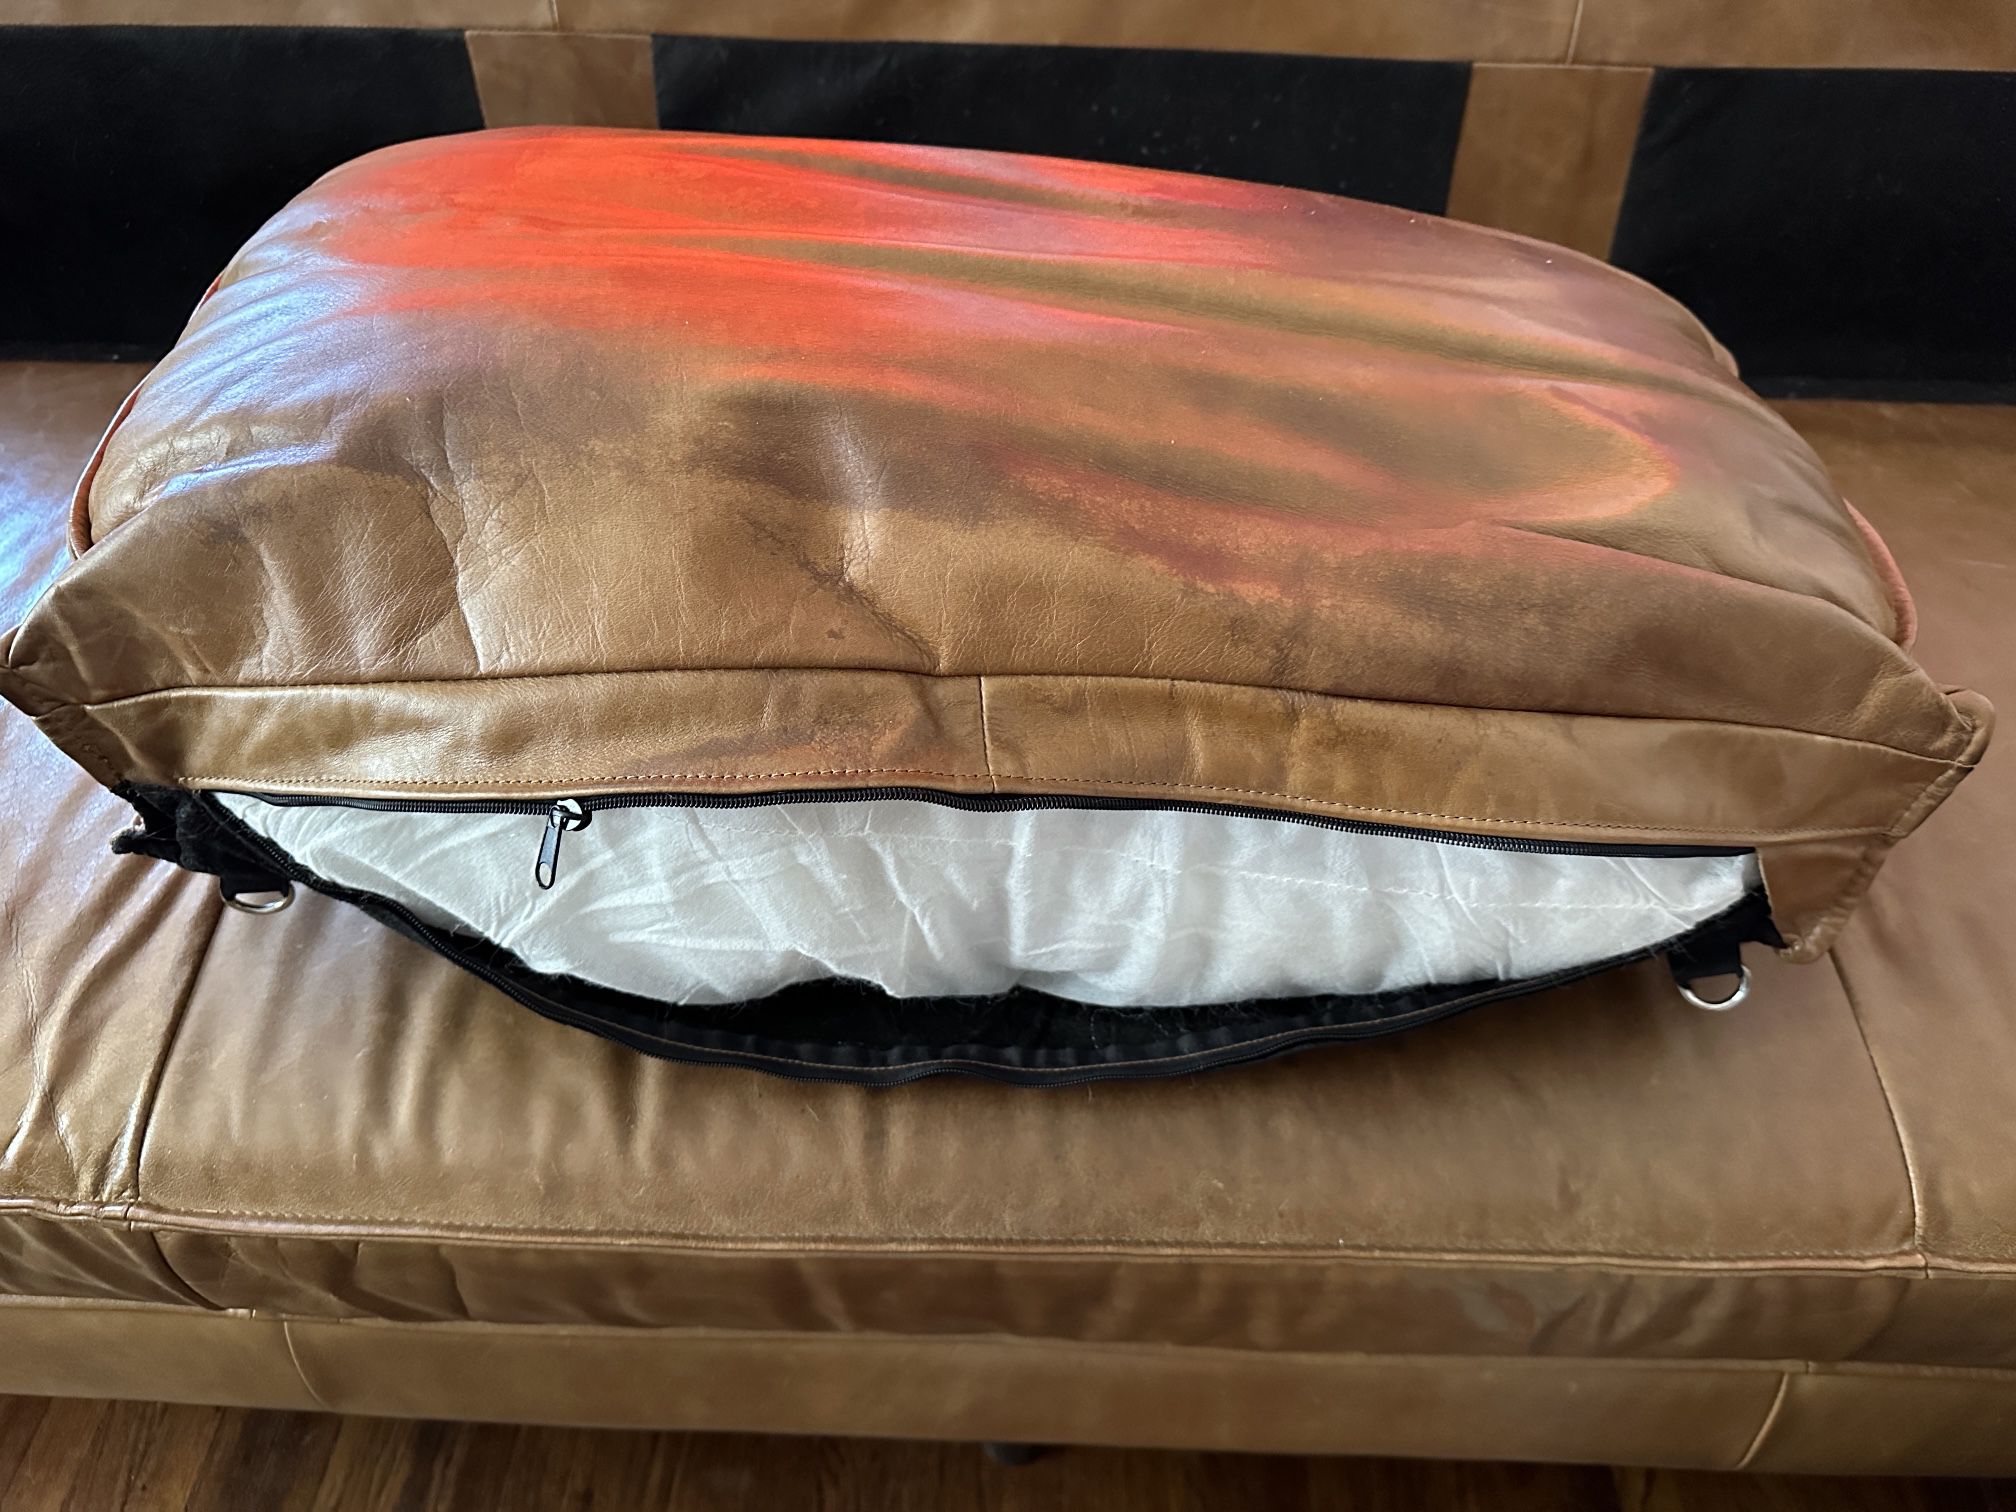 west elm axel leather sofa review